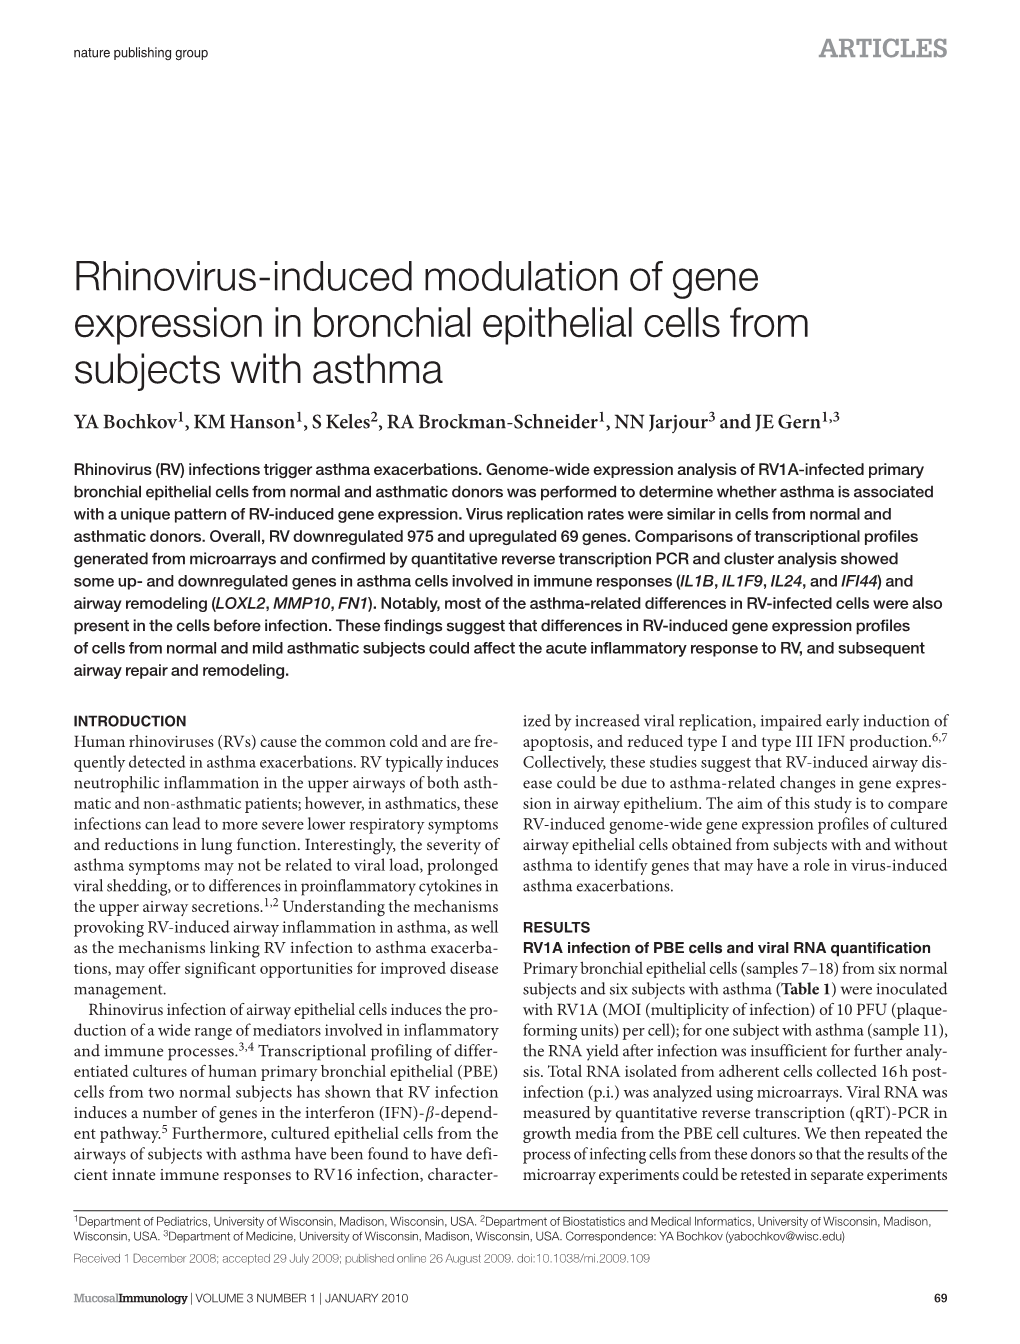 Rhinovirus-Induced Modulation of Gene Expression in Bronchial Epithelial Cells from Subjects with Asthma